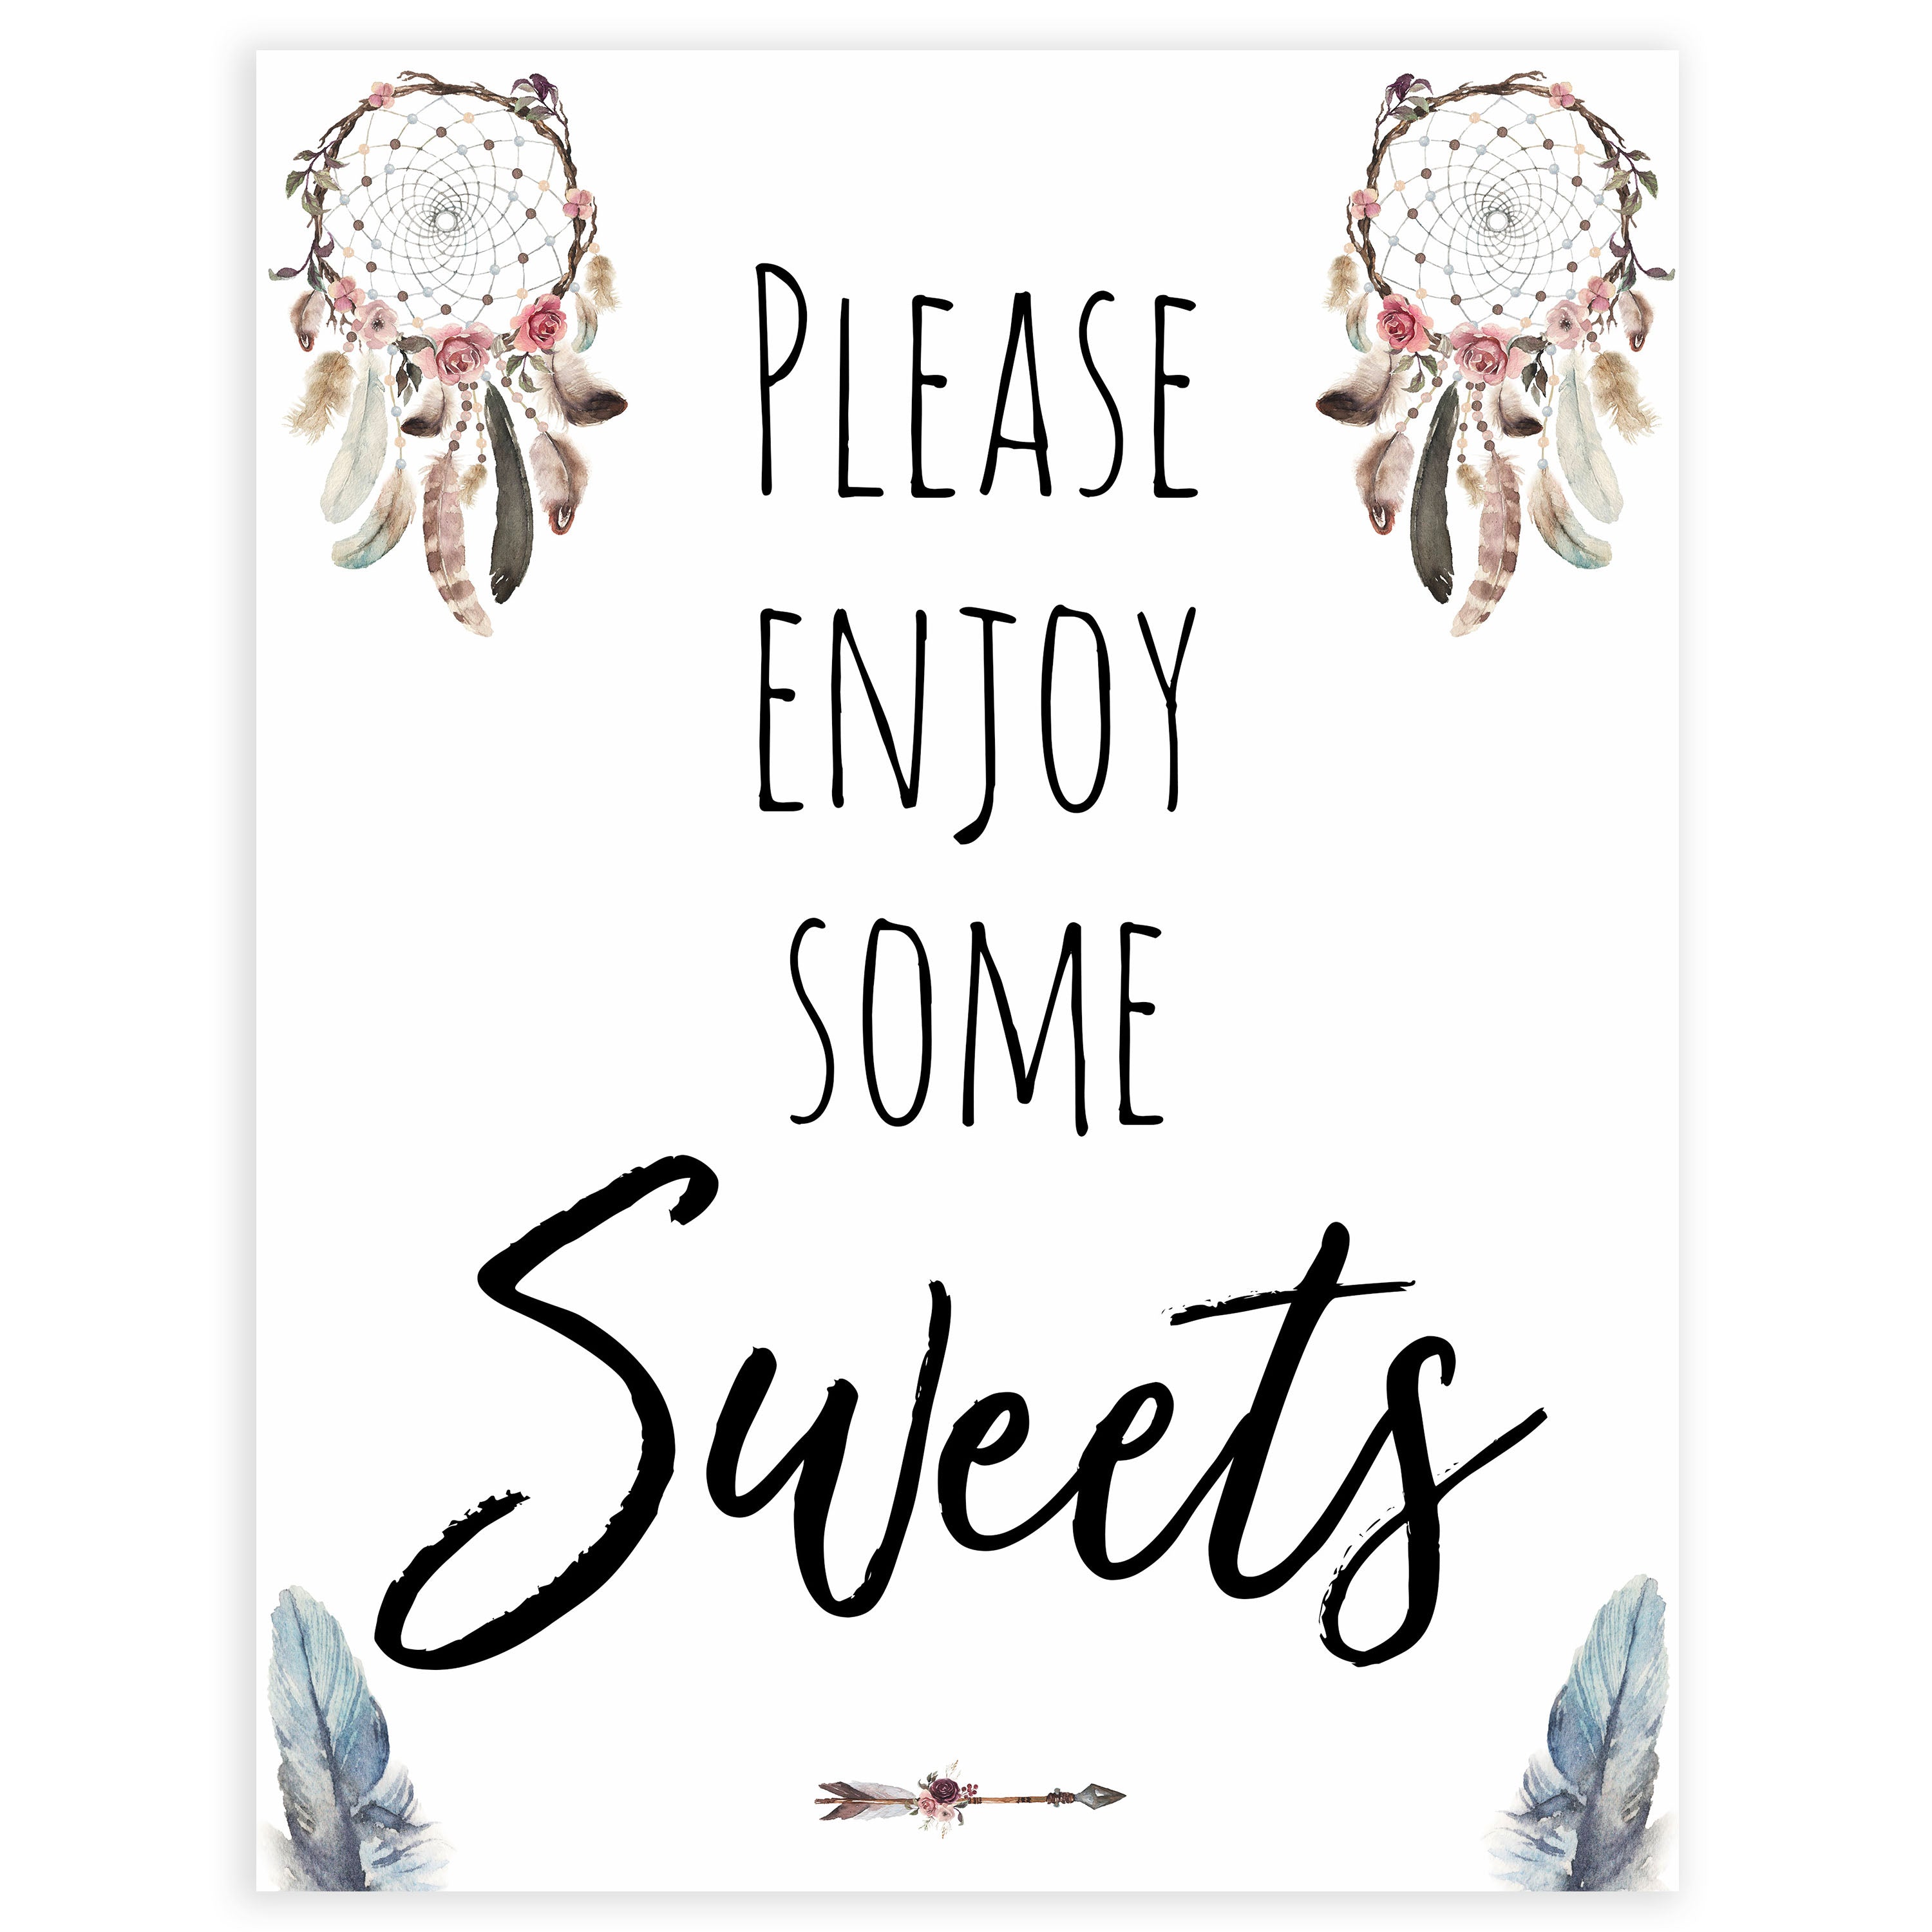 boho baby signs, sweets baby signs, printable baby signs, boho baby decor, fun baby signs, baby shower signs, baby shower decor